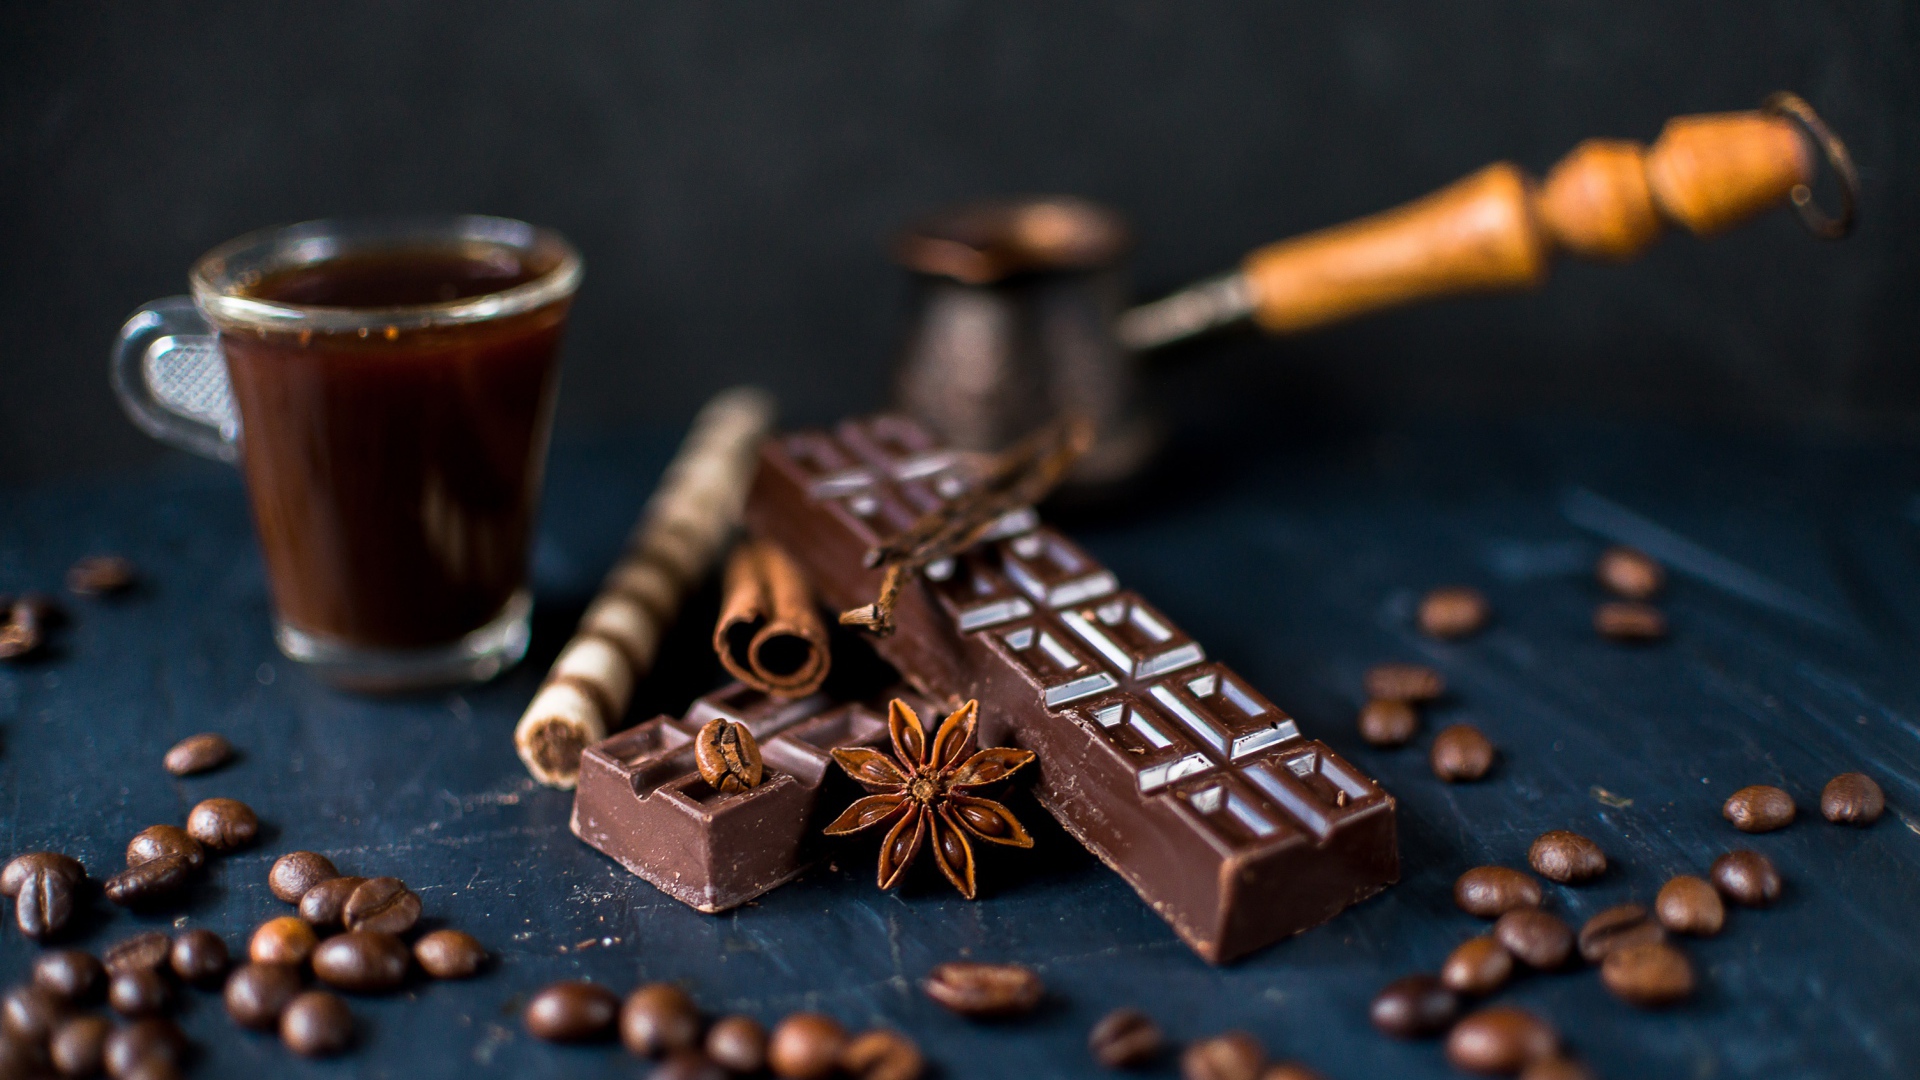 A cup of coffee on a table with chocolate and coffee beans